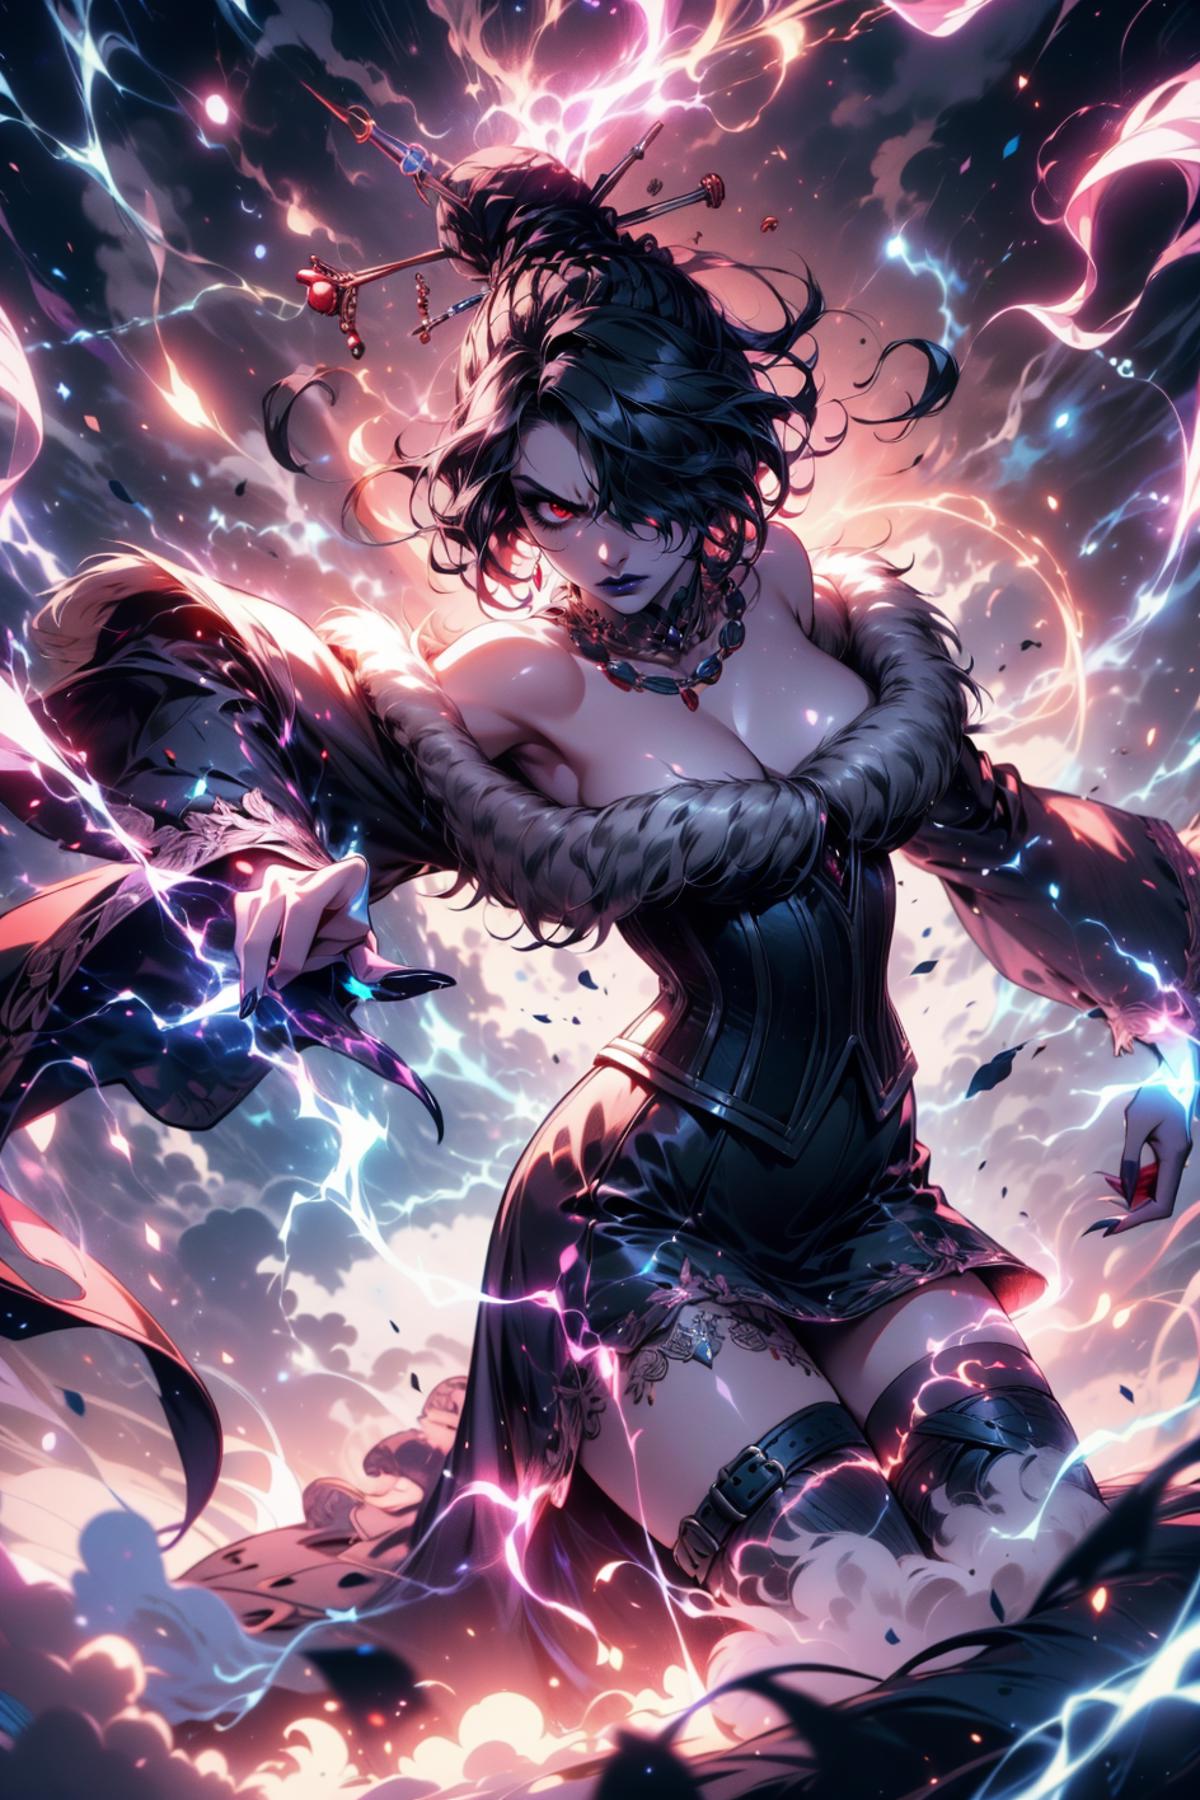 A woman in a black corset and fur dress, with claws and a lightning bolt in the background.